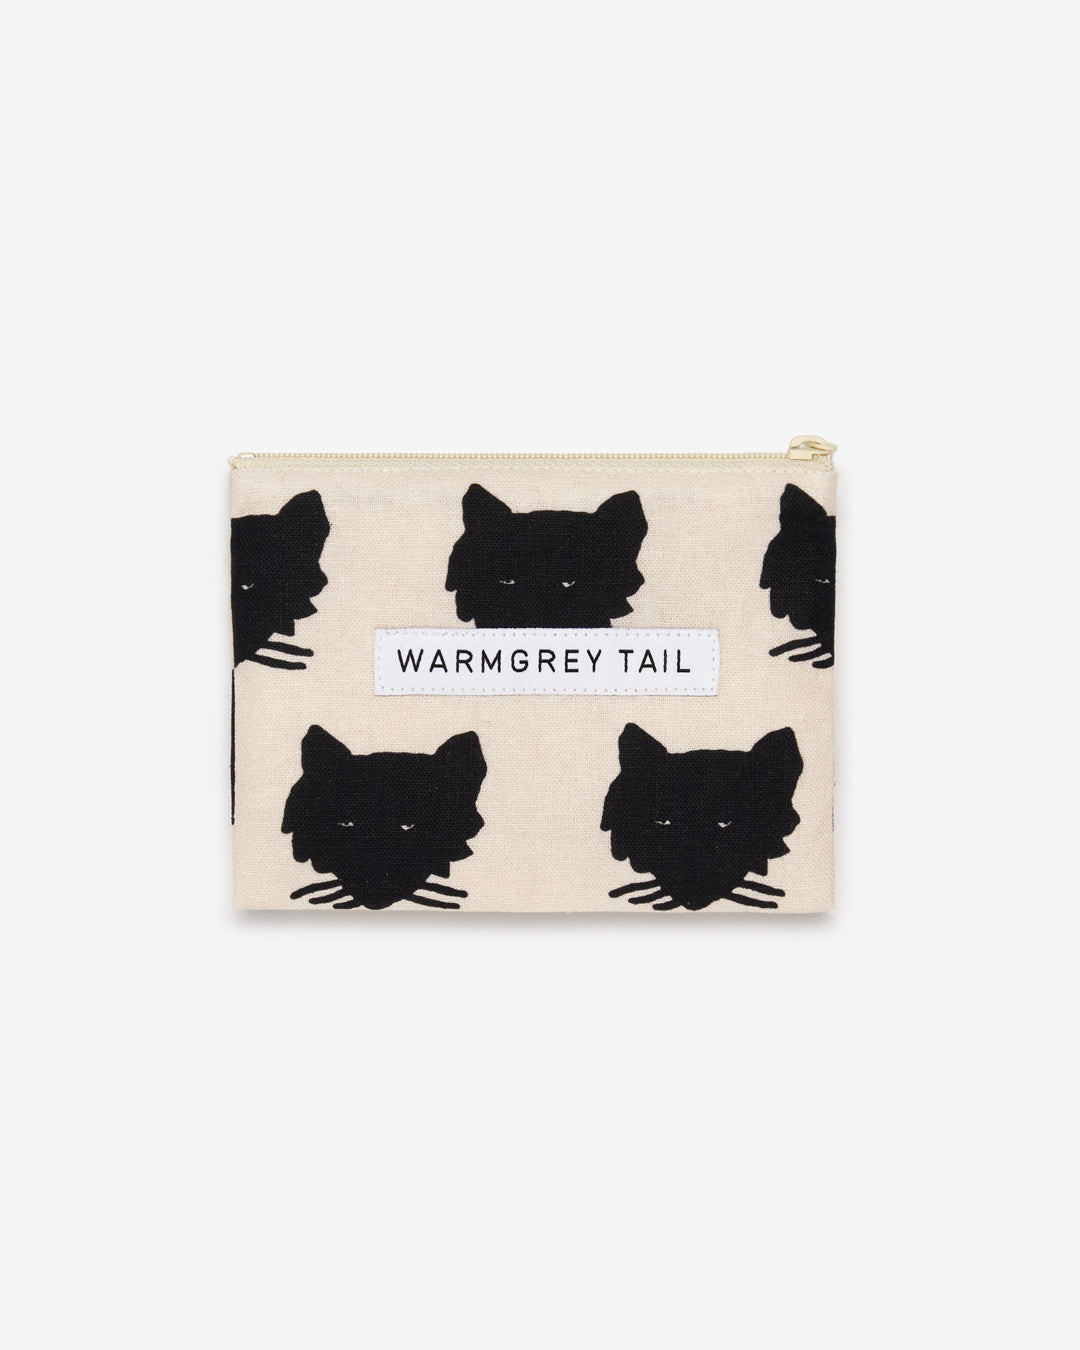 WOLF FLAT POUCH - BLACK ON IVORY (2size)